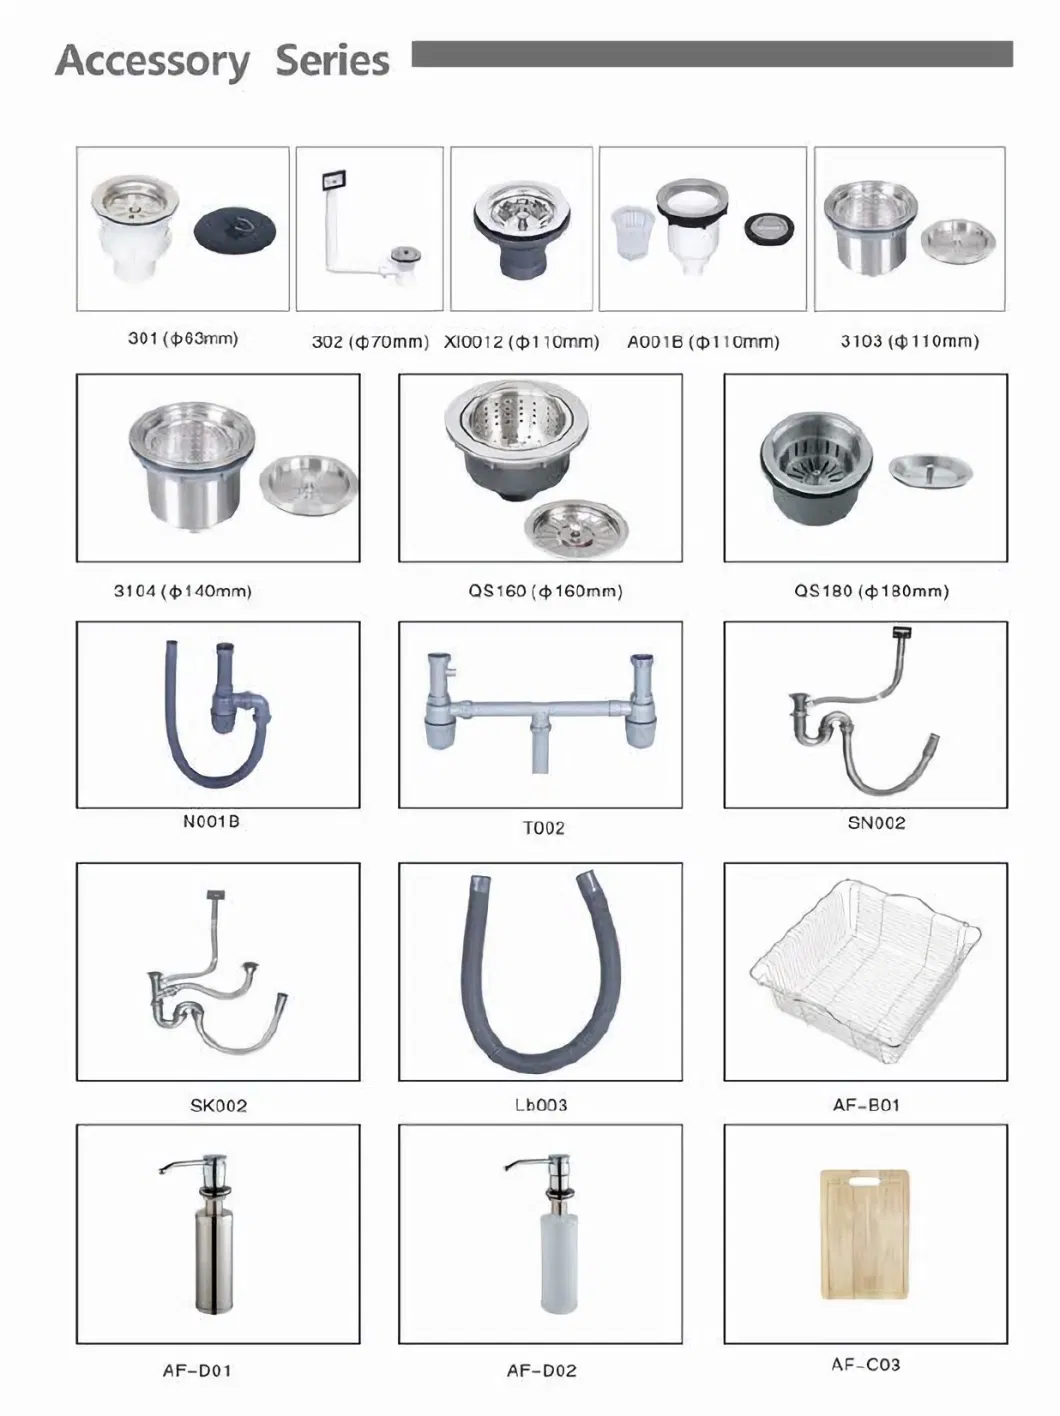 OEM/ODM Brands Stainless Steel Double Sink Basin with Drainboard